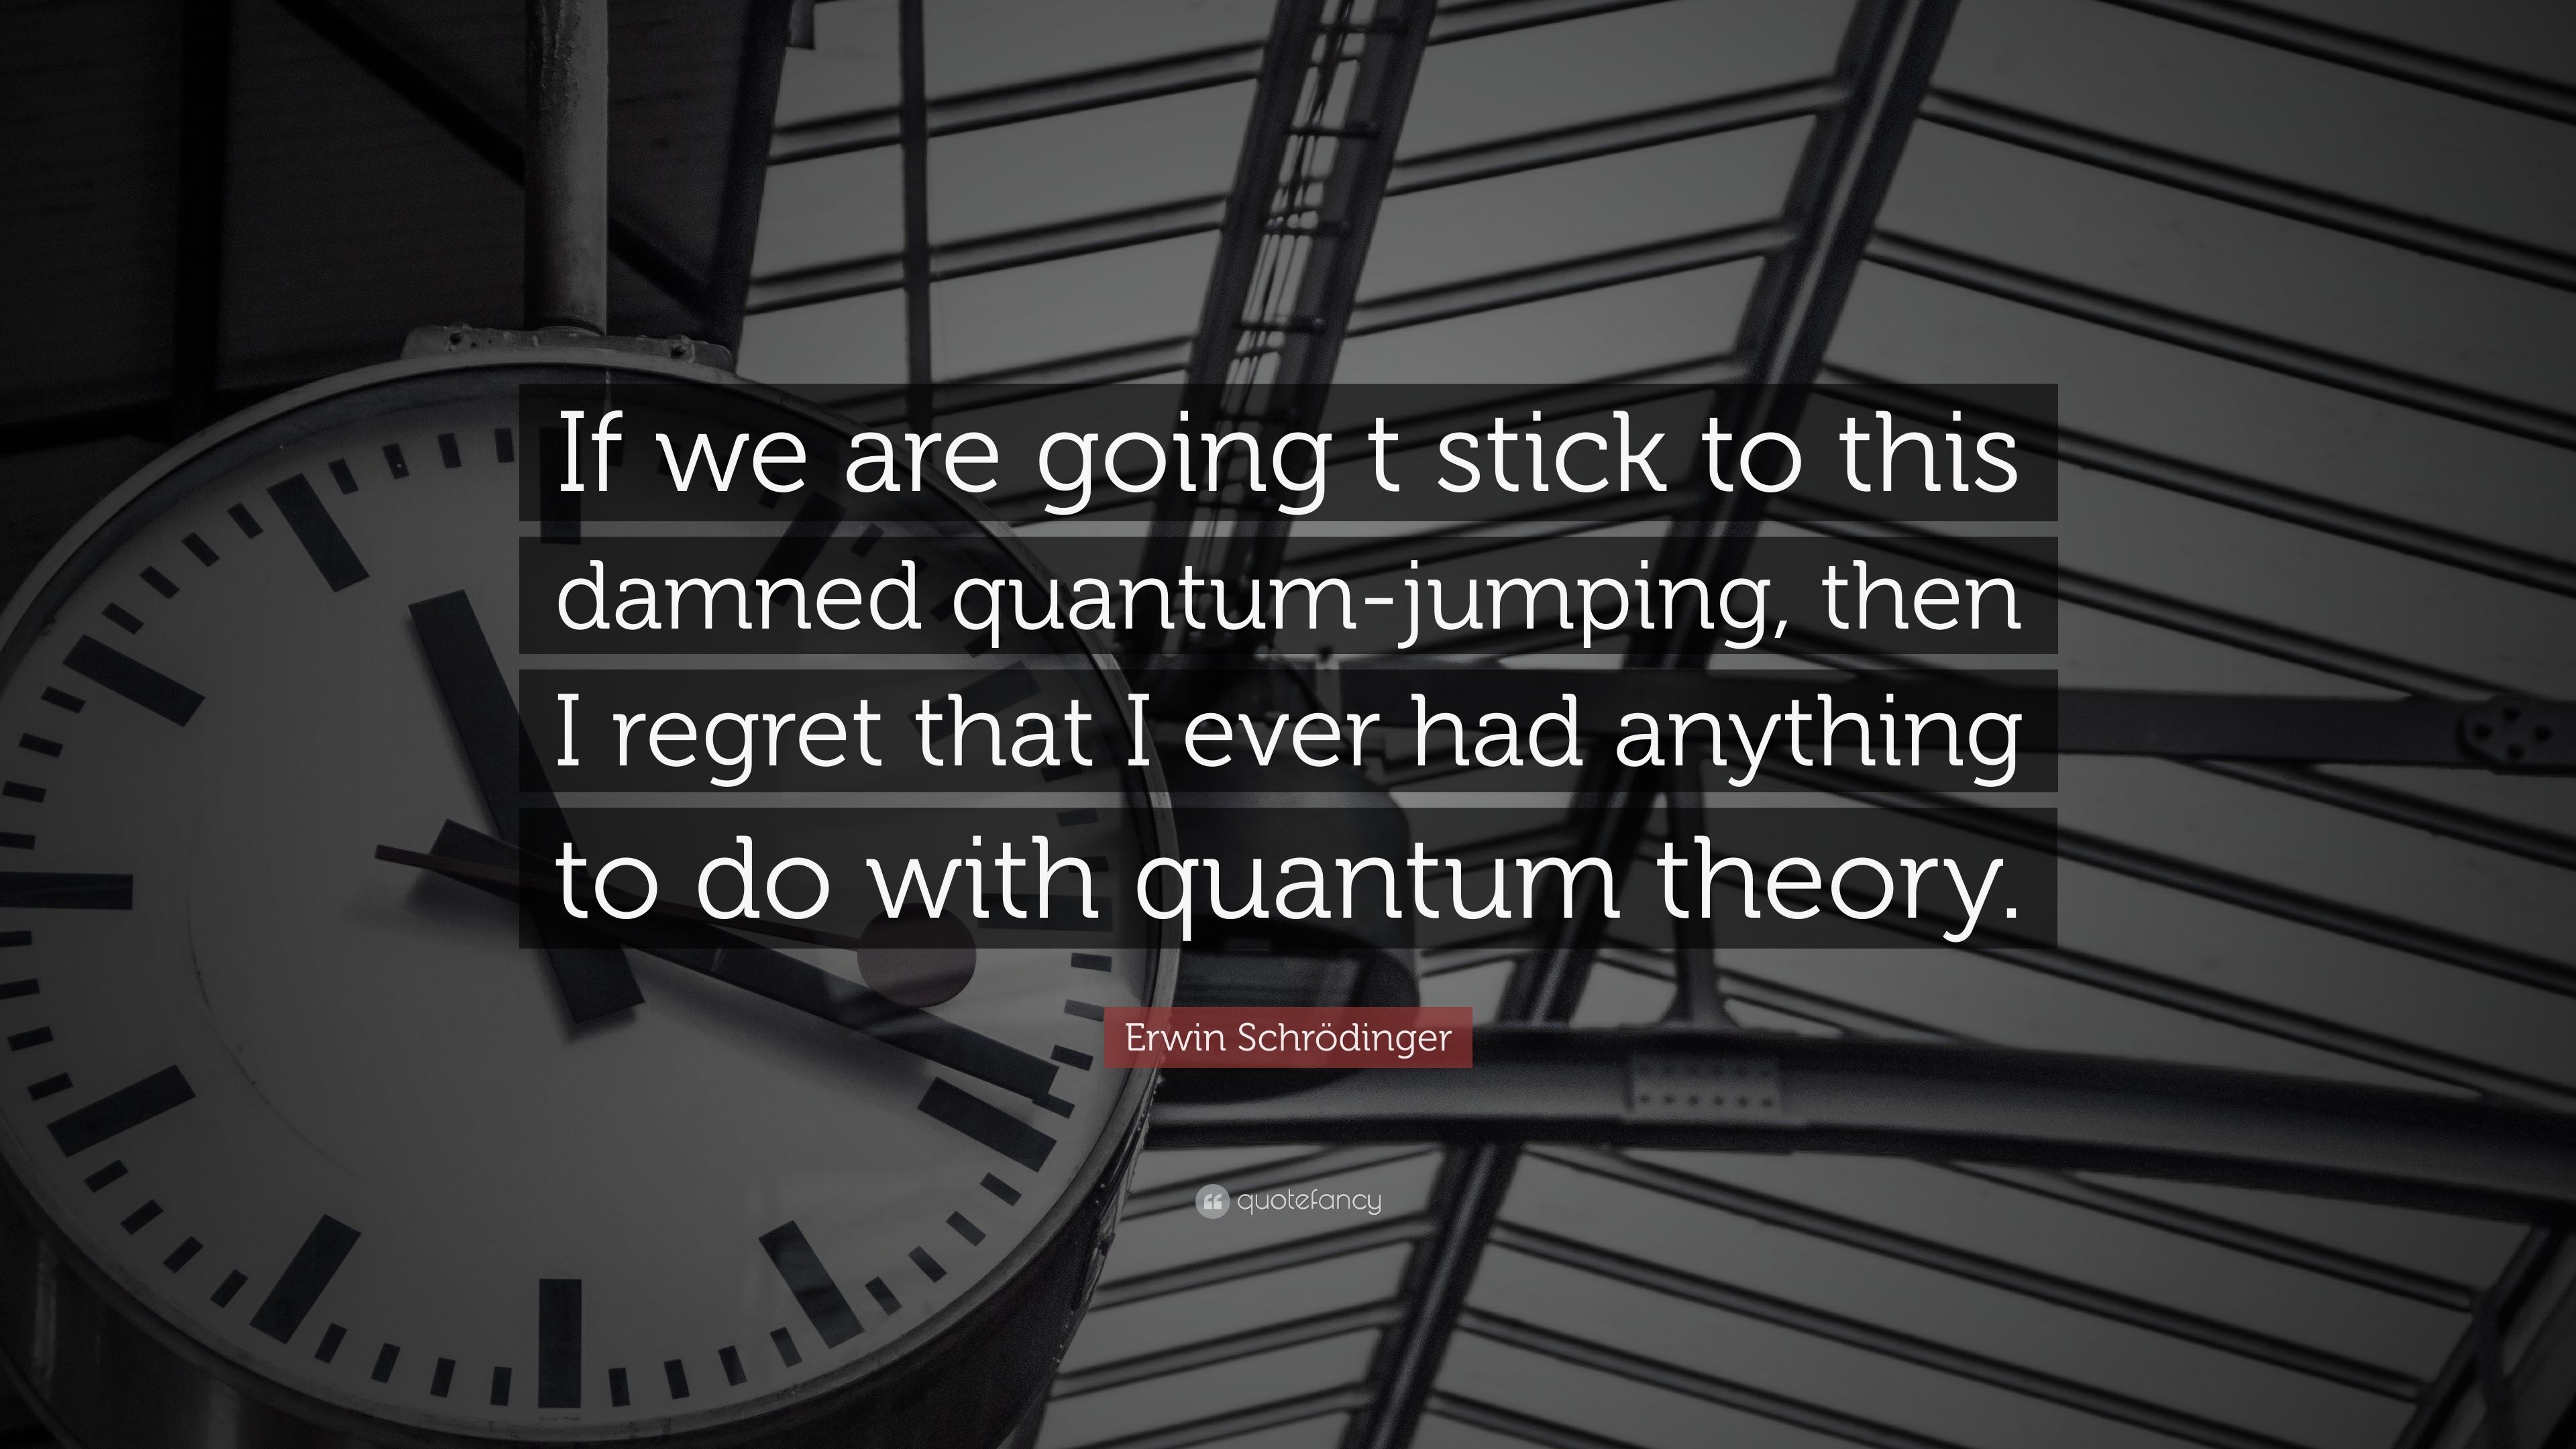 Damned Quantum Jumping, Then .quotefancy.com